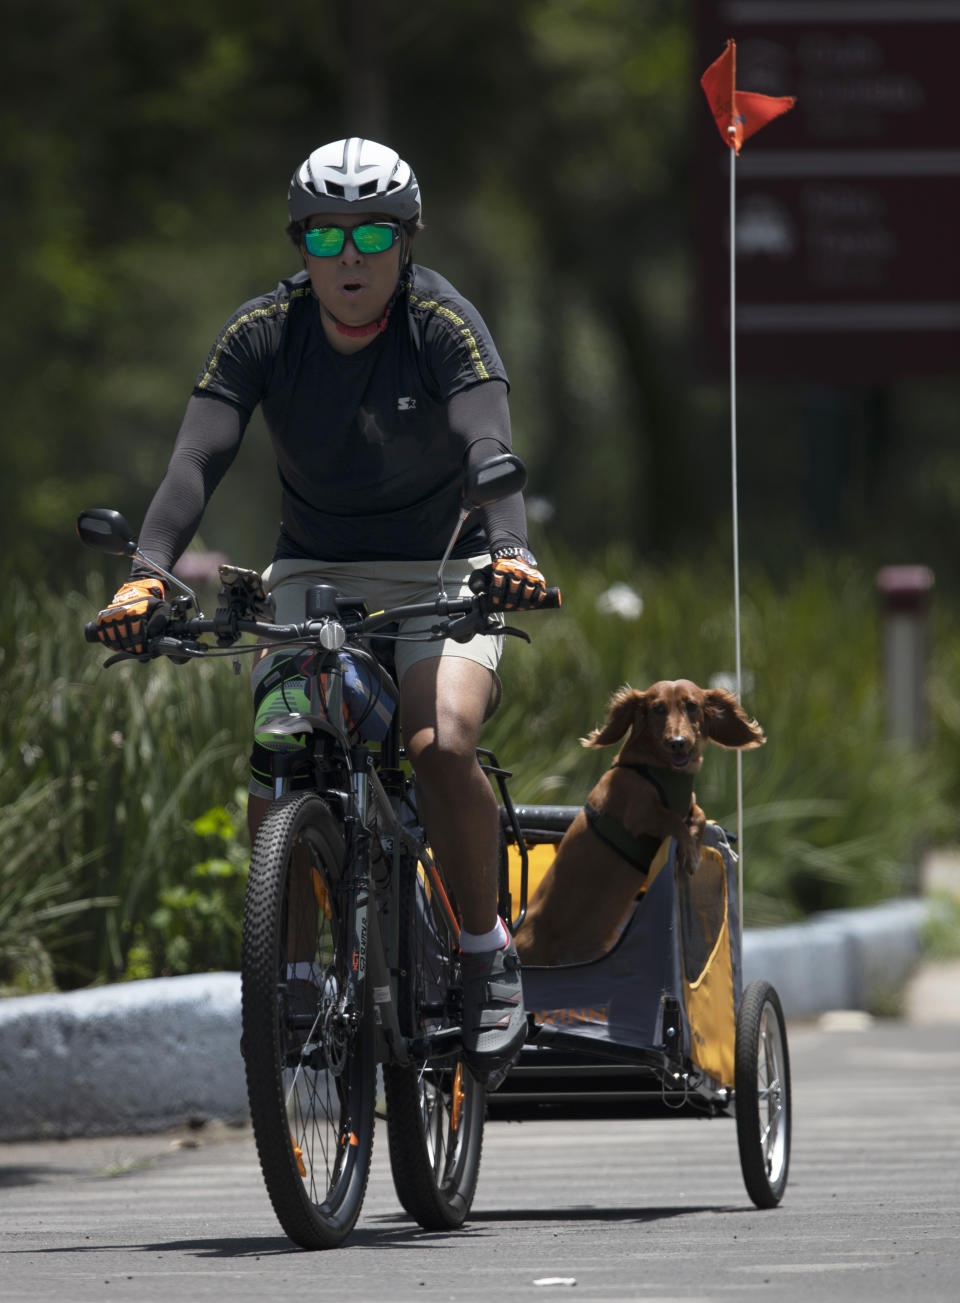 A man rides his bicycle with his dog in tow amid the new coronavirus pandemic at Chapultepec park in Mexico City, Sunday, July 19, 2020. (AP Photo/Marco Ugarte)